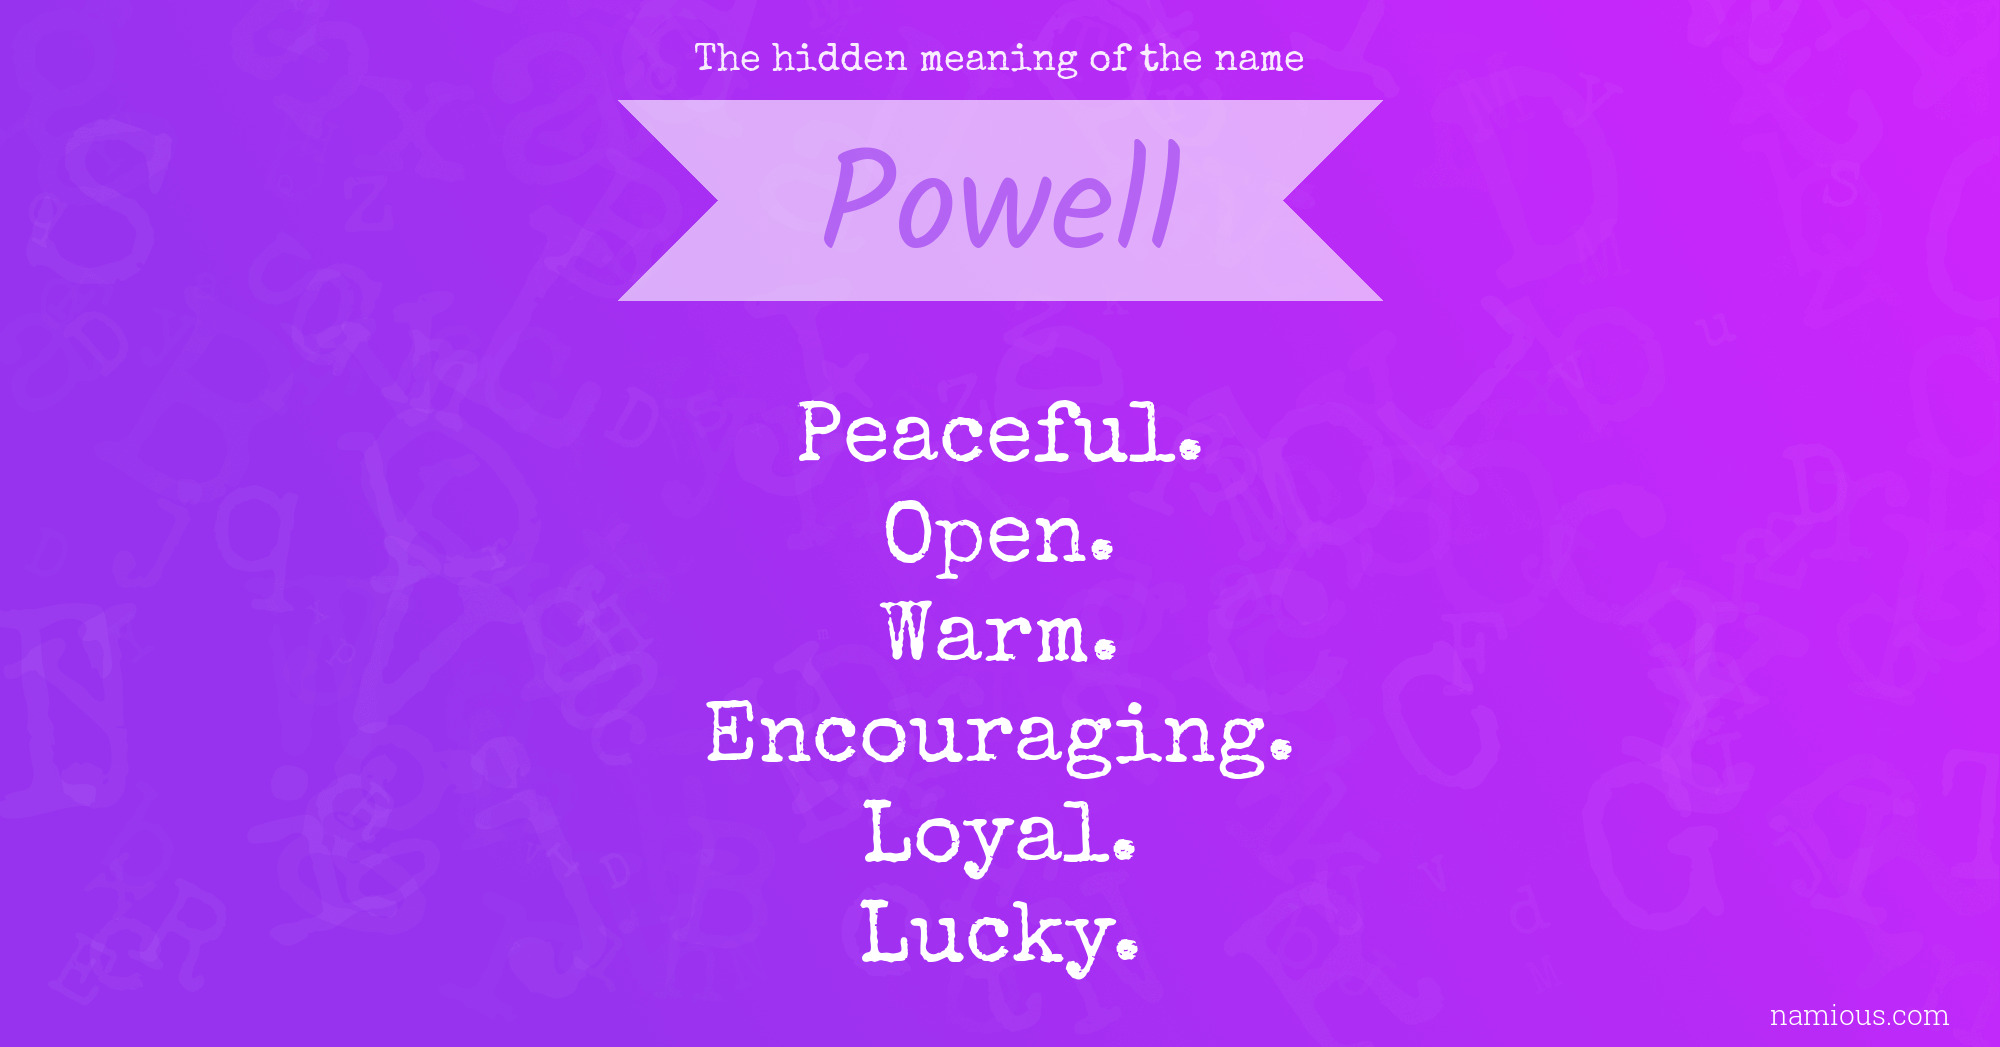 The hidden meaning of the name Powell